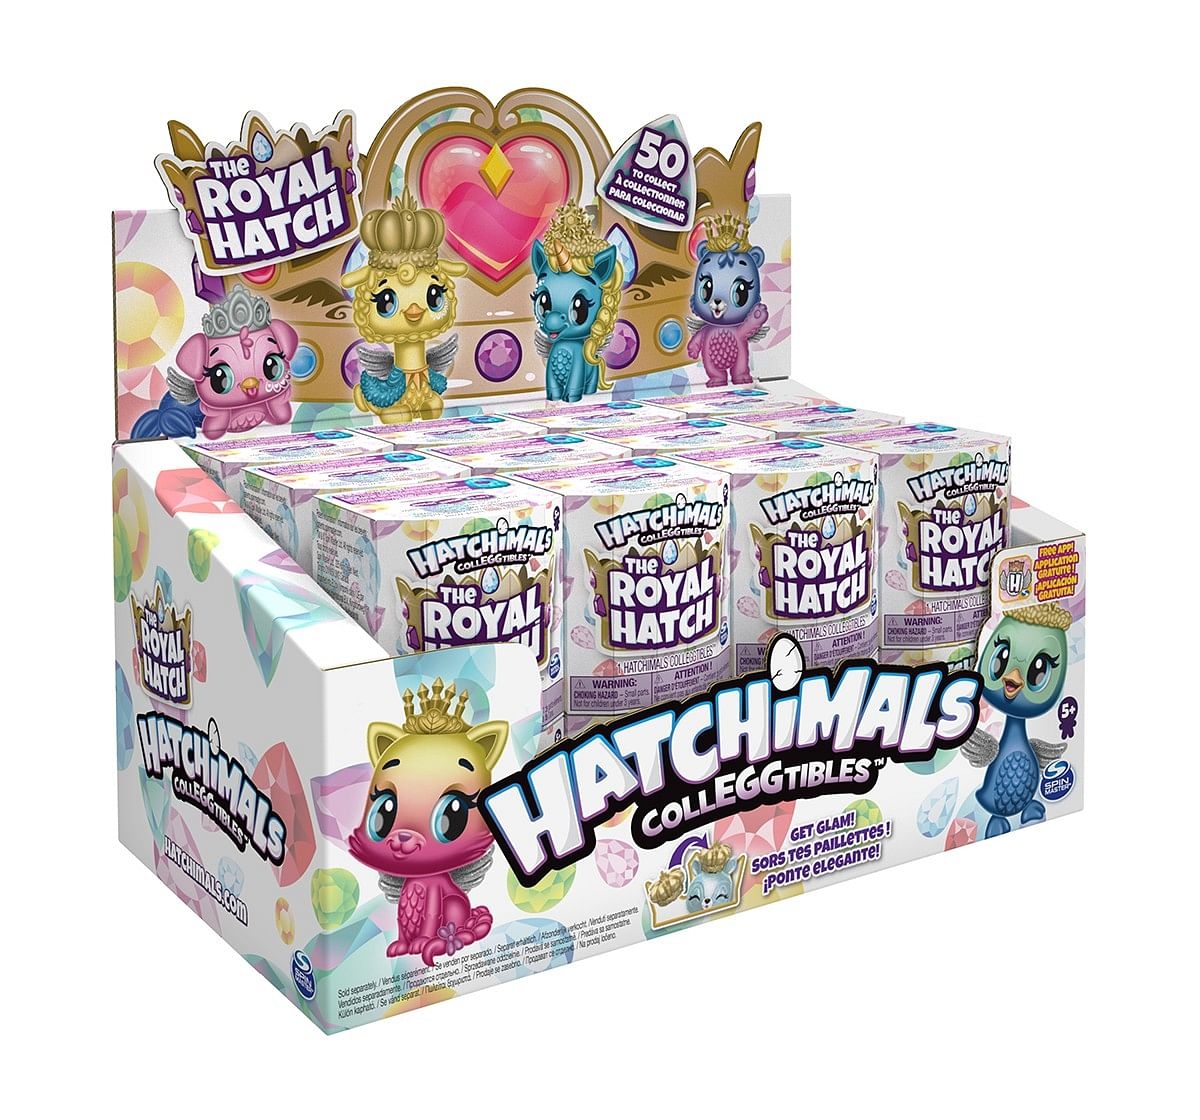 Hatchimals Colleggtibles Season 6 -  1 Pack Novelty for age 5Y+ - 6.35 Cm 